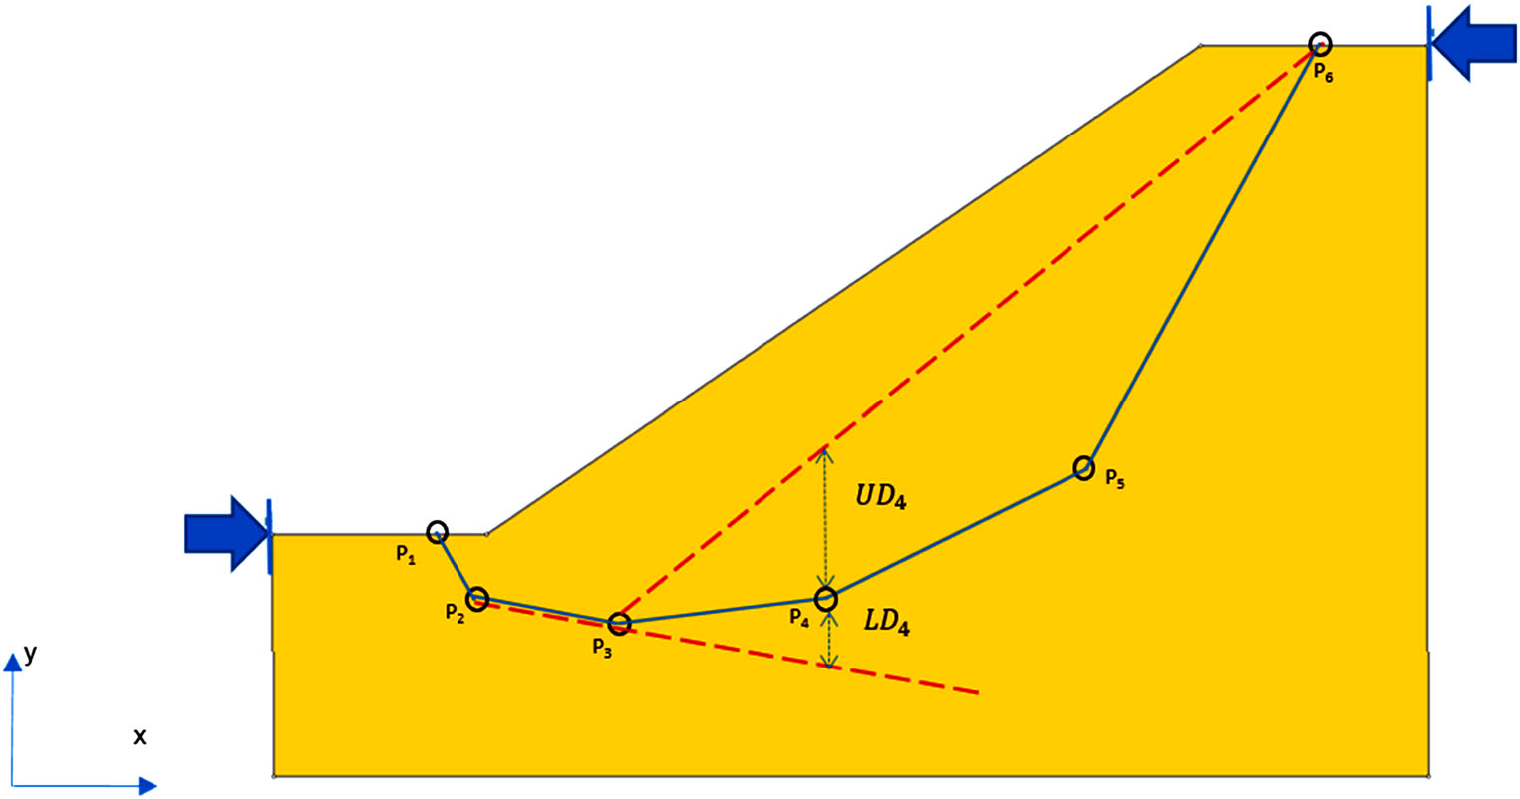 Figure 1. Static boundary constraints in SAO.